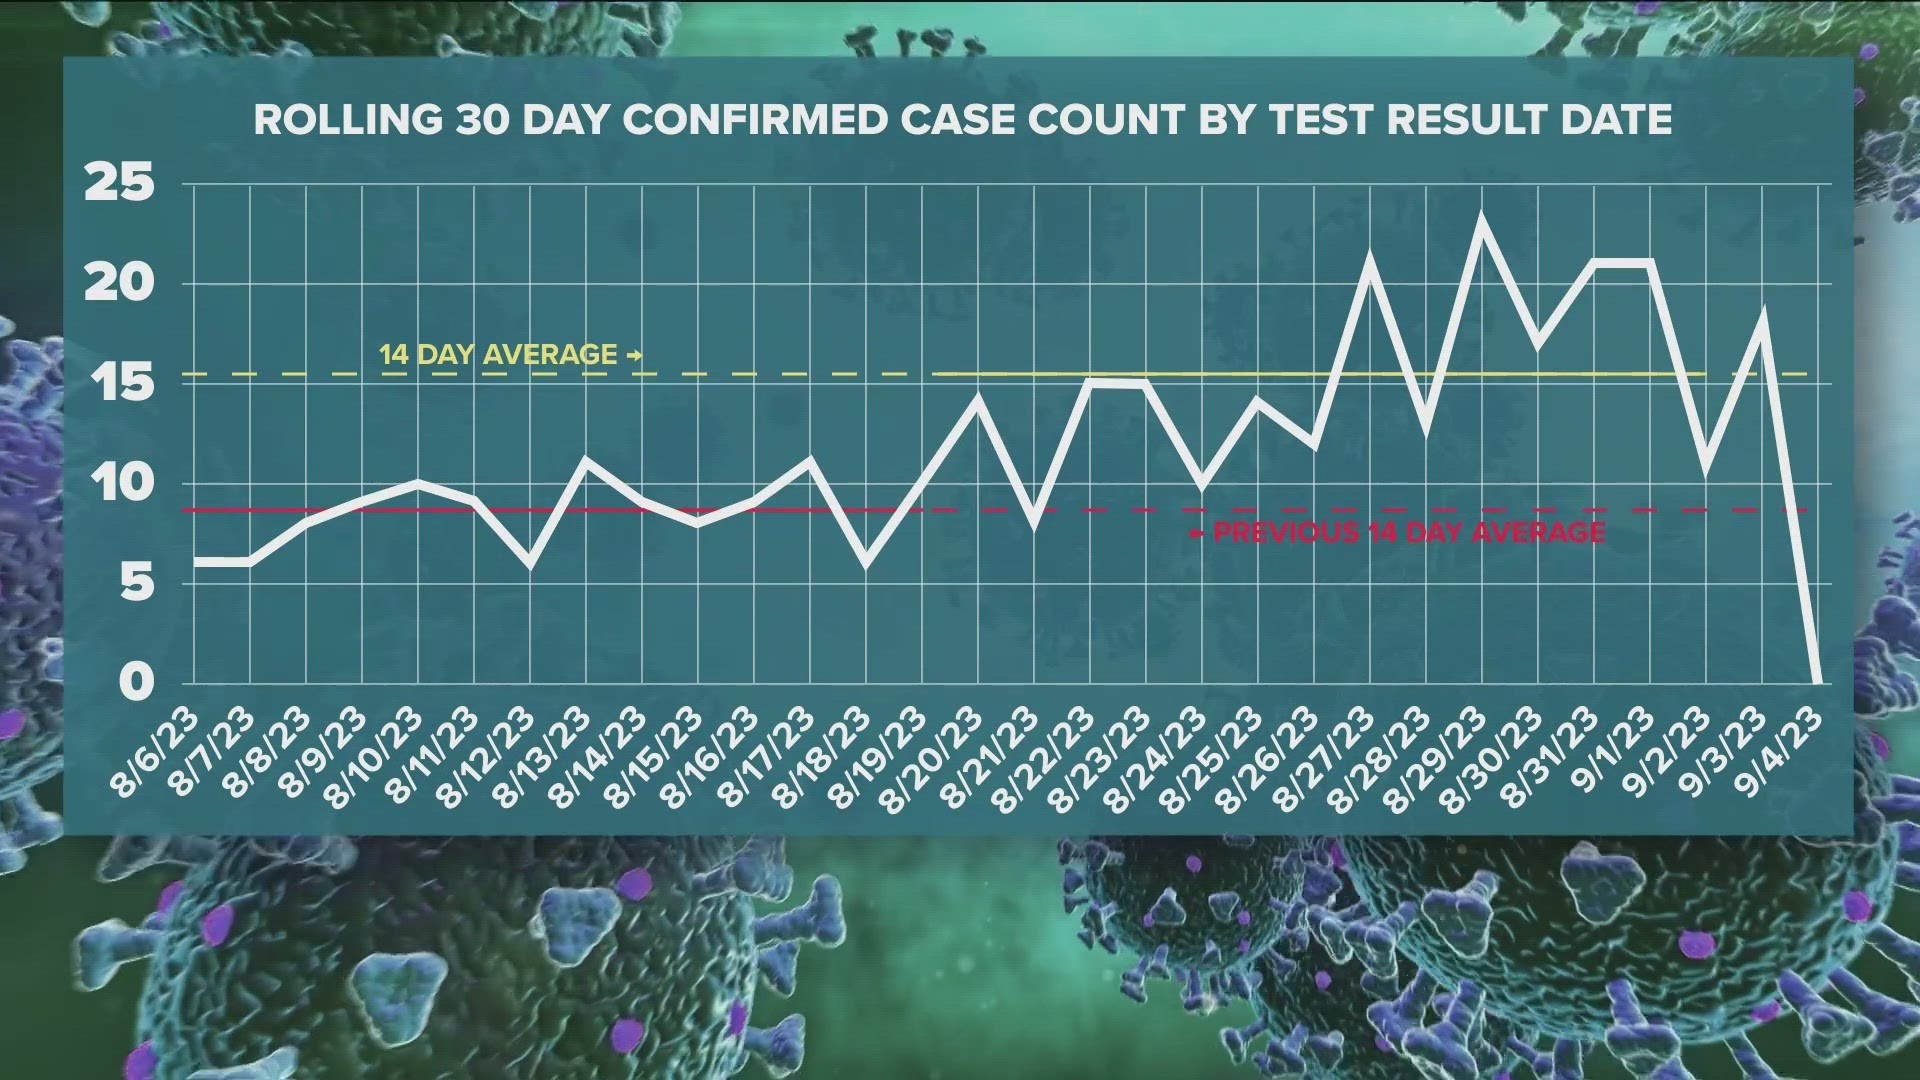 The confirmed case count by test result date averages 15.36 cases per day from Aug. 6 to Sept. 5, according to the Toledo-Lucas County Health Department.